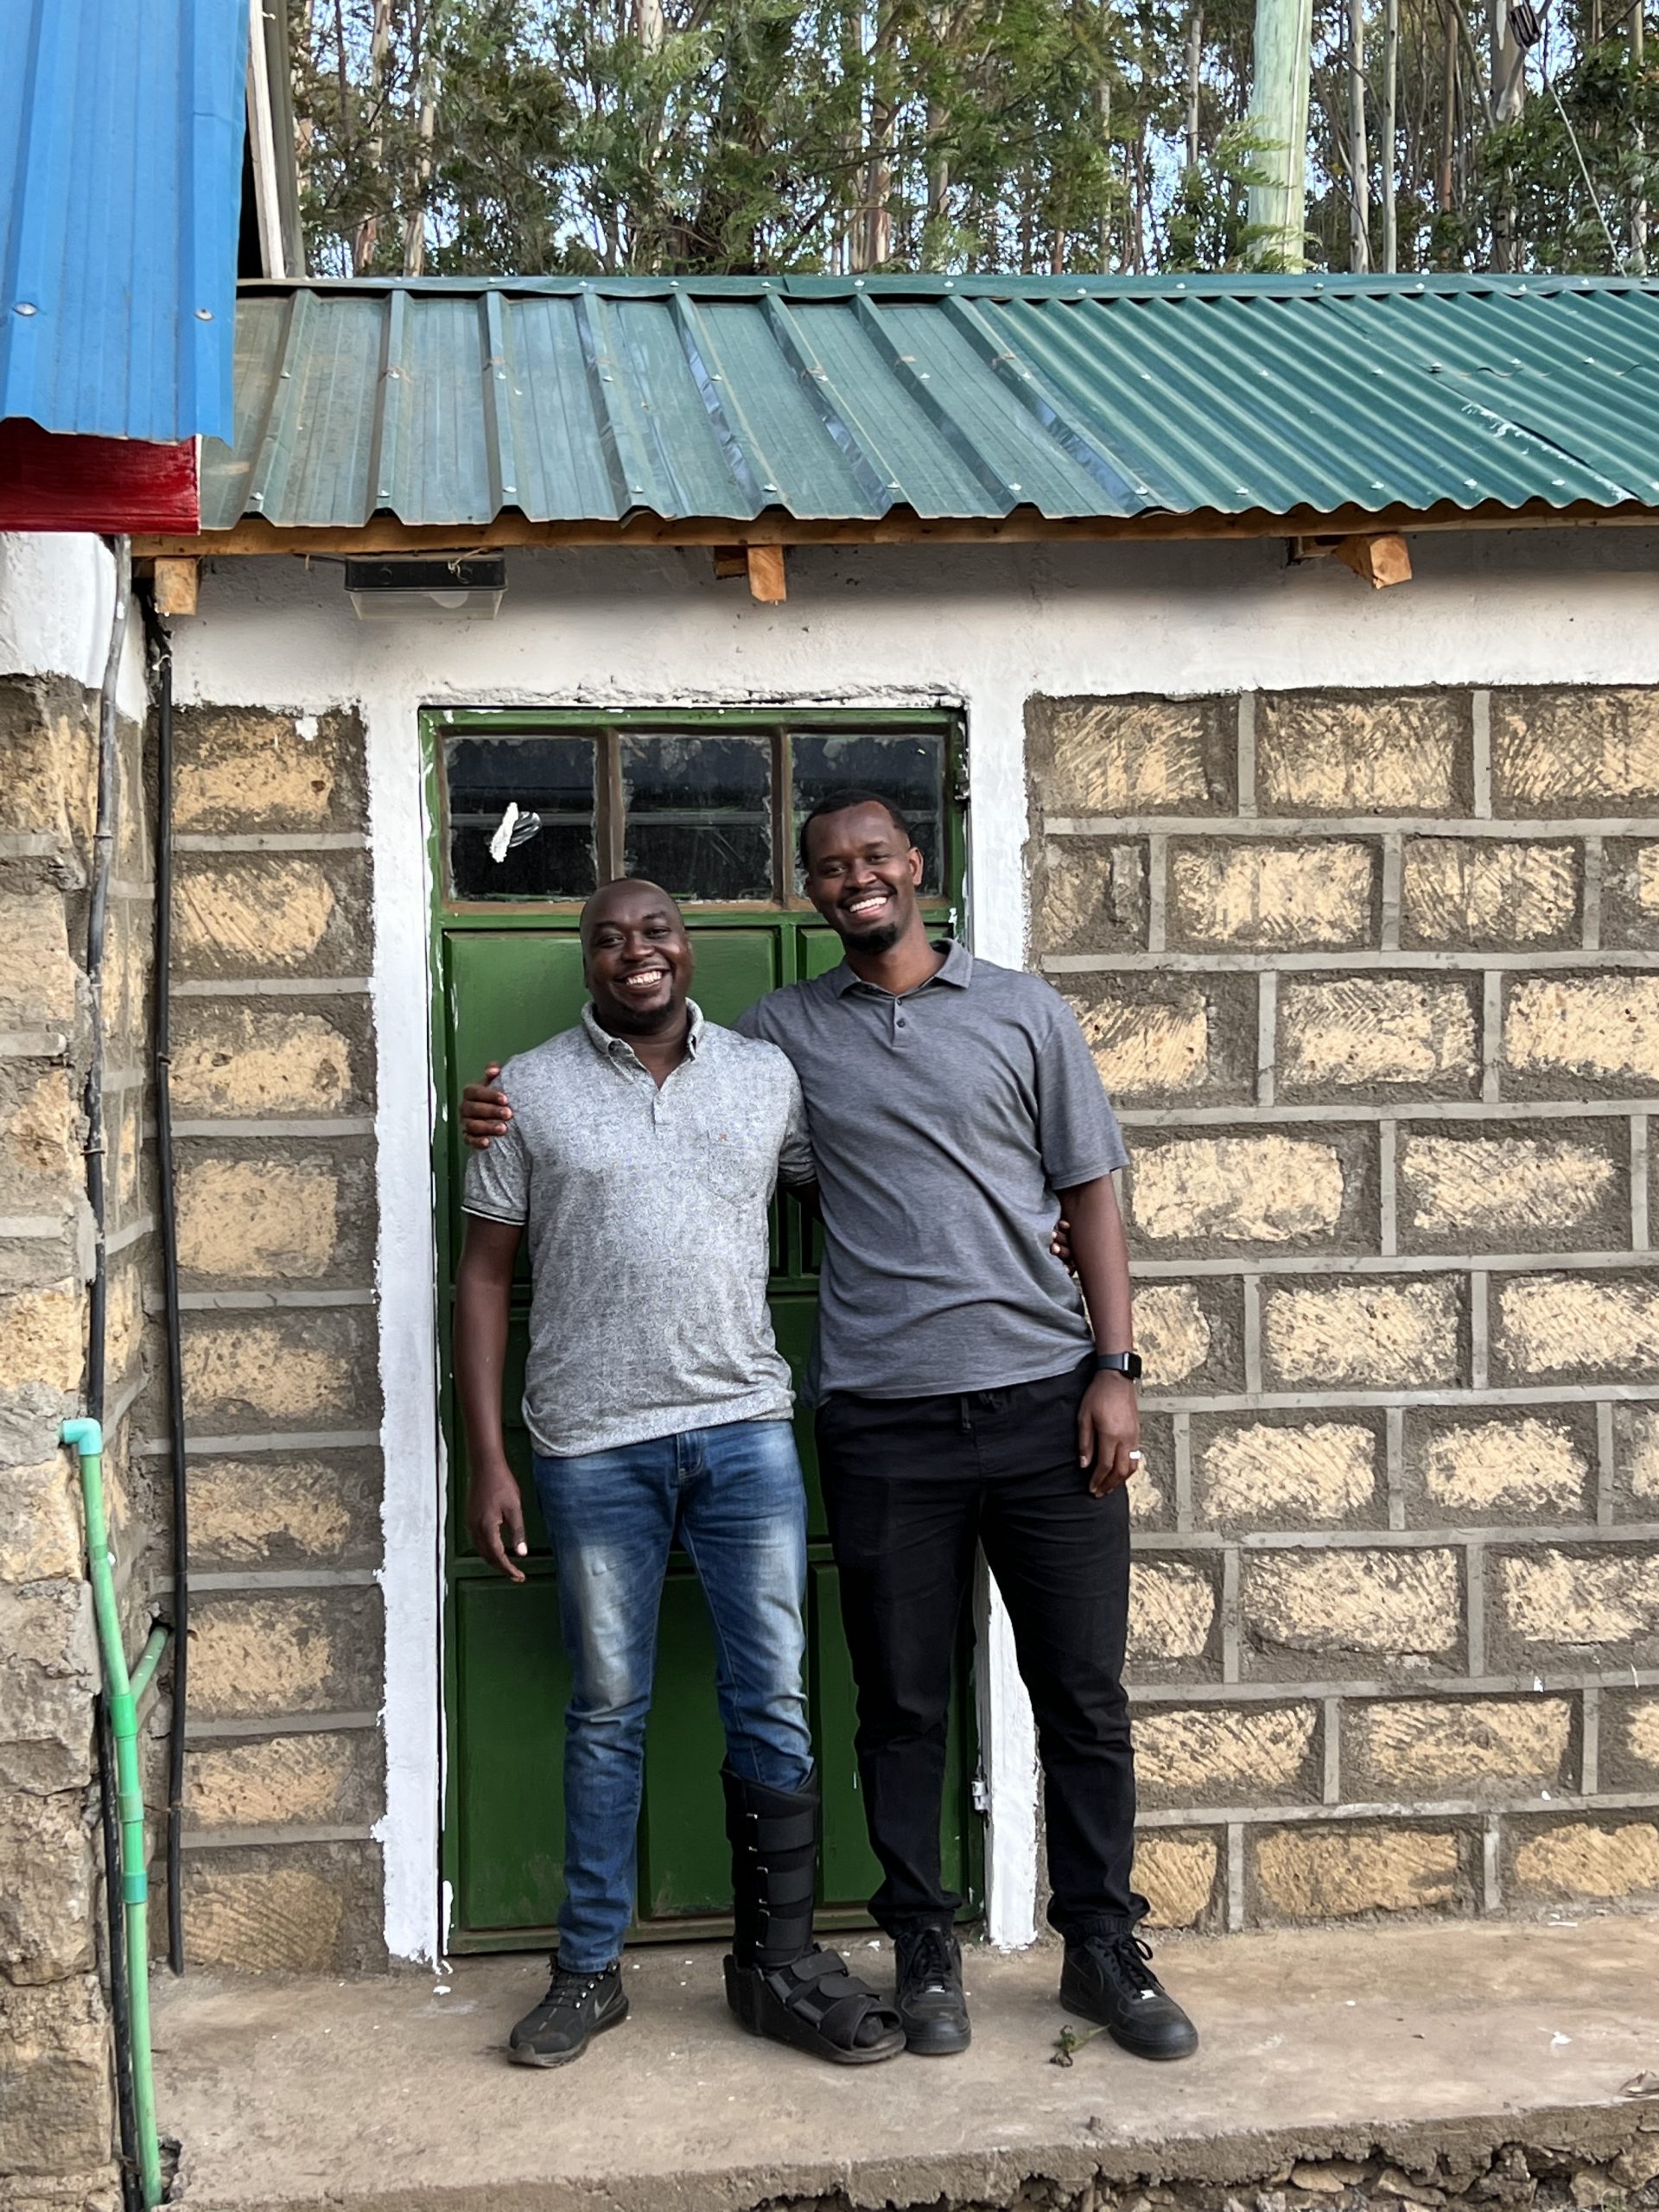 Zack is one of our partners in Kenya, standing with our US based staff and programs coordinator, Bikonzi.